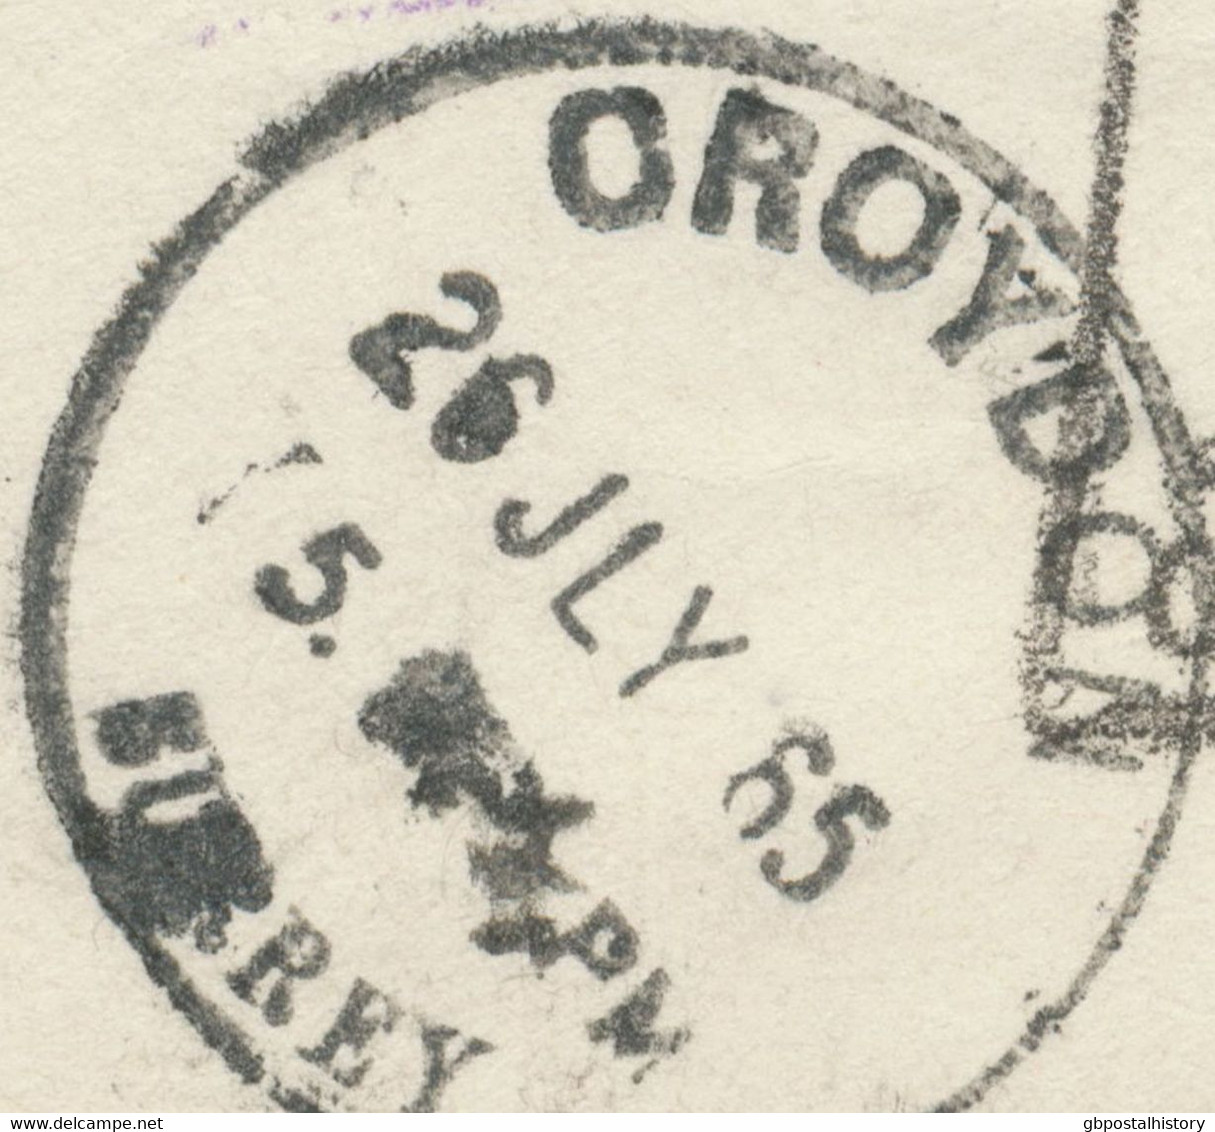 GB 1965 Superb Unpaid Cover W Skeleton Postmark „CROYDON / SURREY“ (29mm), Also Postage Due 6d CHARGE NOT COLLECTED - Impuestos